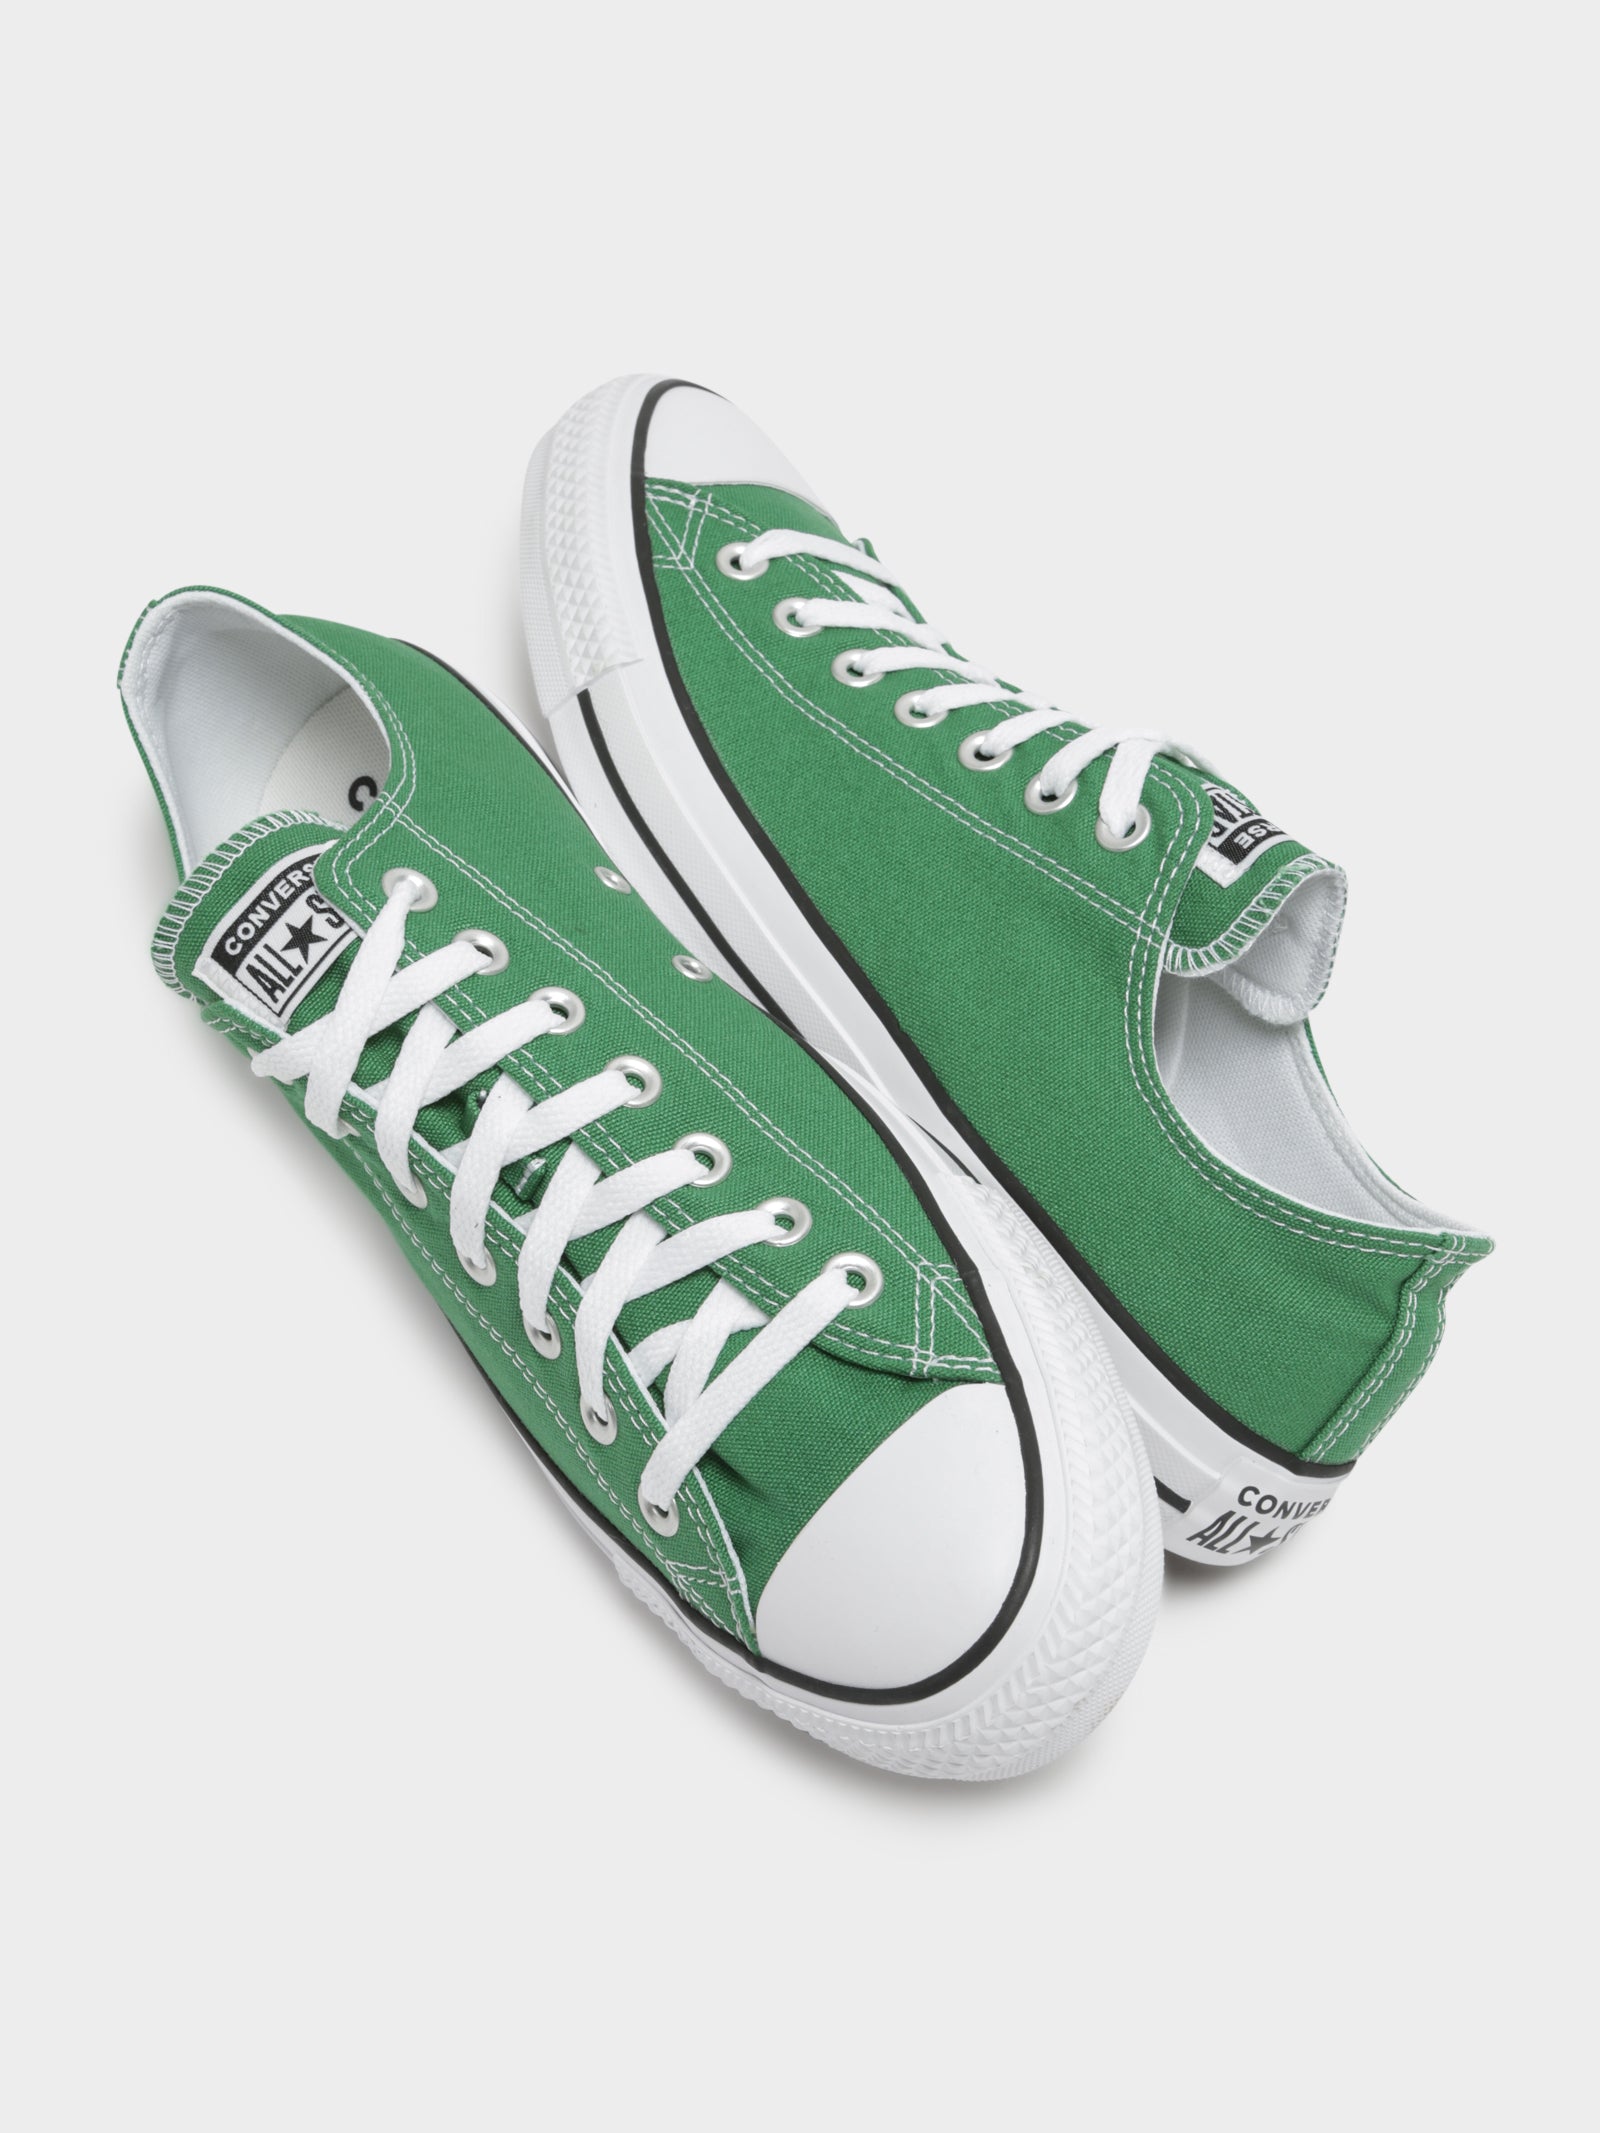 Rug Trampe kold Unisex Chuck Taylor All Star Low Sneakers in Amazon Green - Glue Store